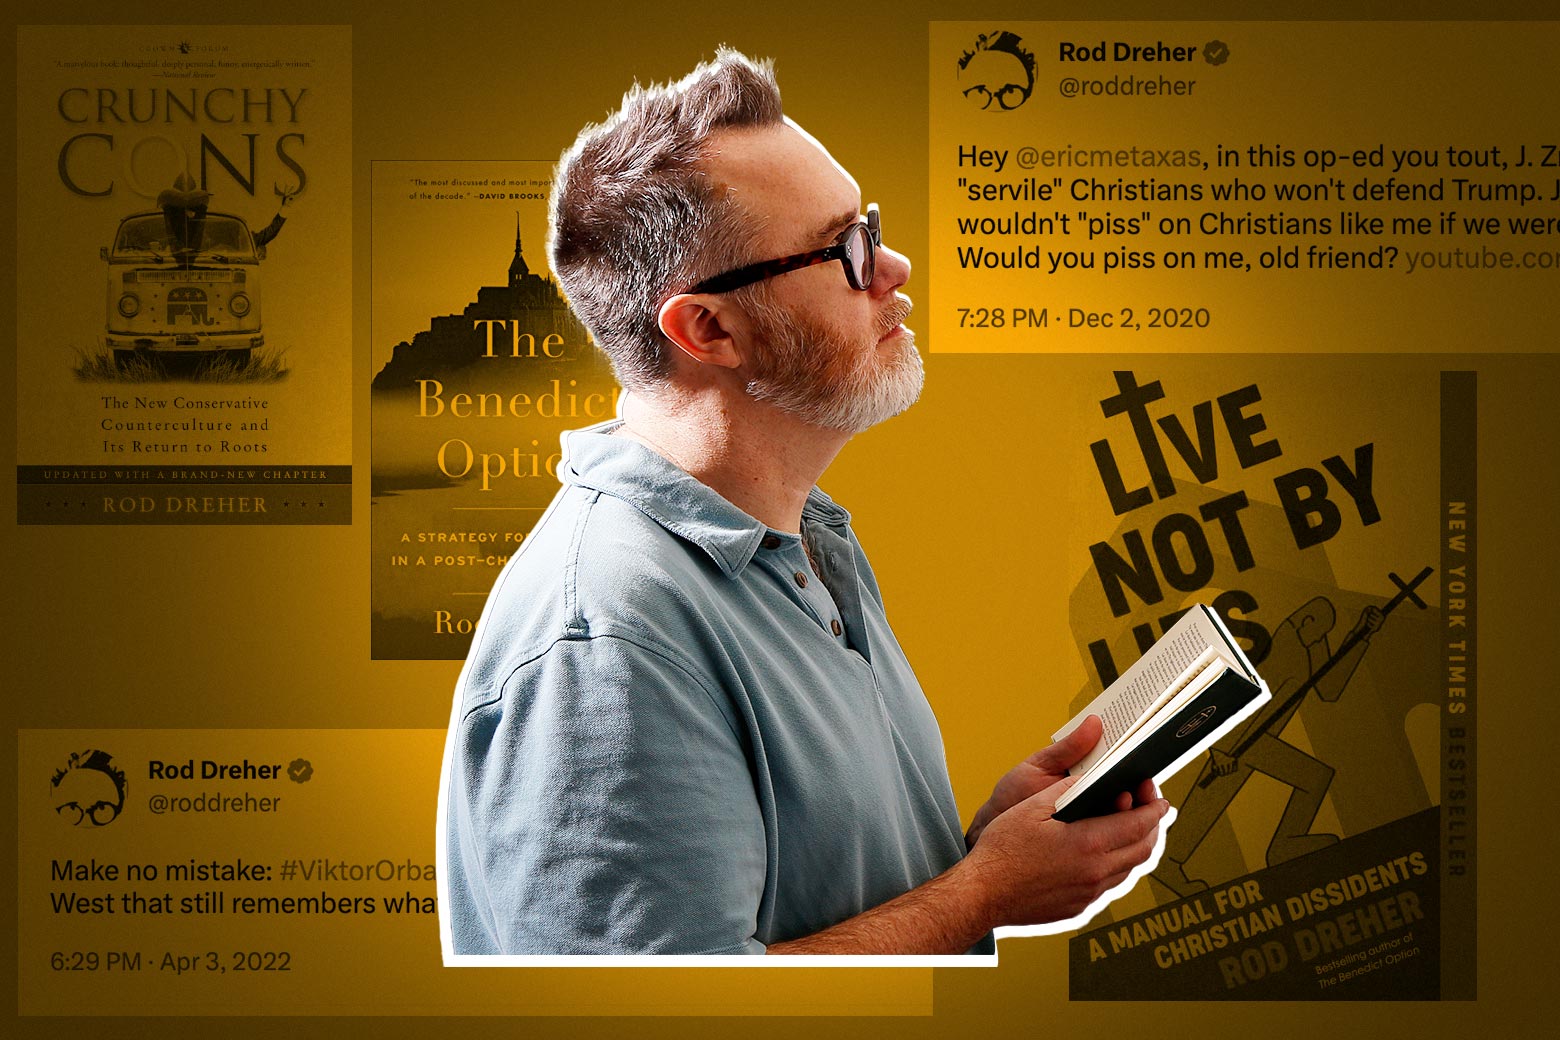 For Years, the Left Has Laughed at Rod Dreher. Is That Over Now?